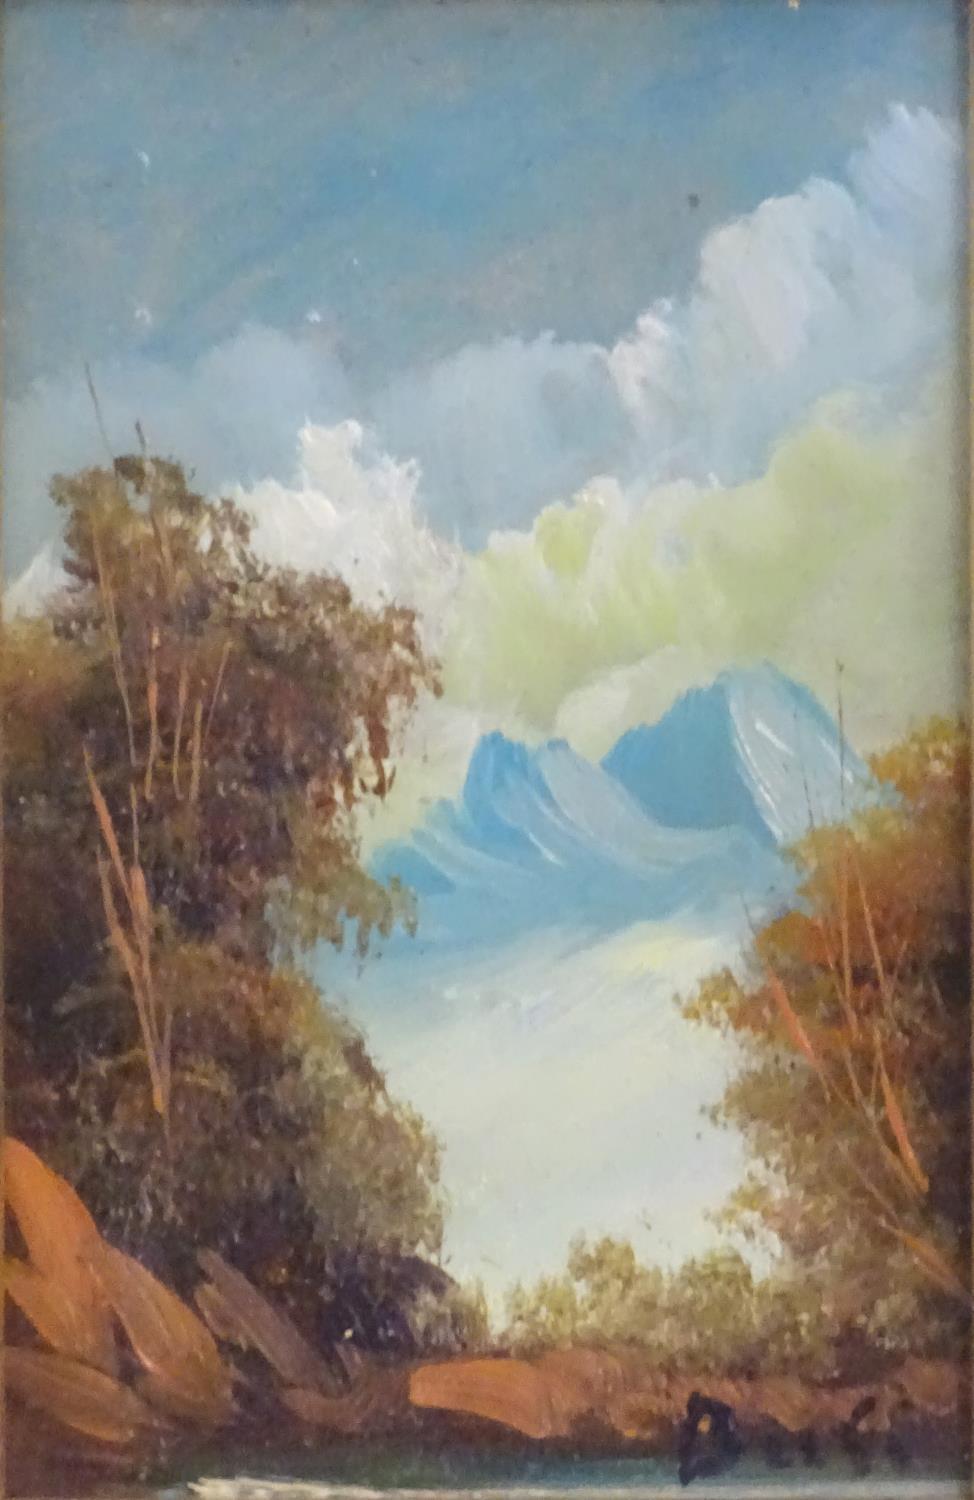 Buss, XX, Oil on board, A mountain landscape scene. Signed lower right. Approx. 5 1/2" x 3 1/2" - Image 4 of 5